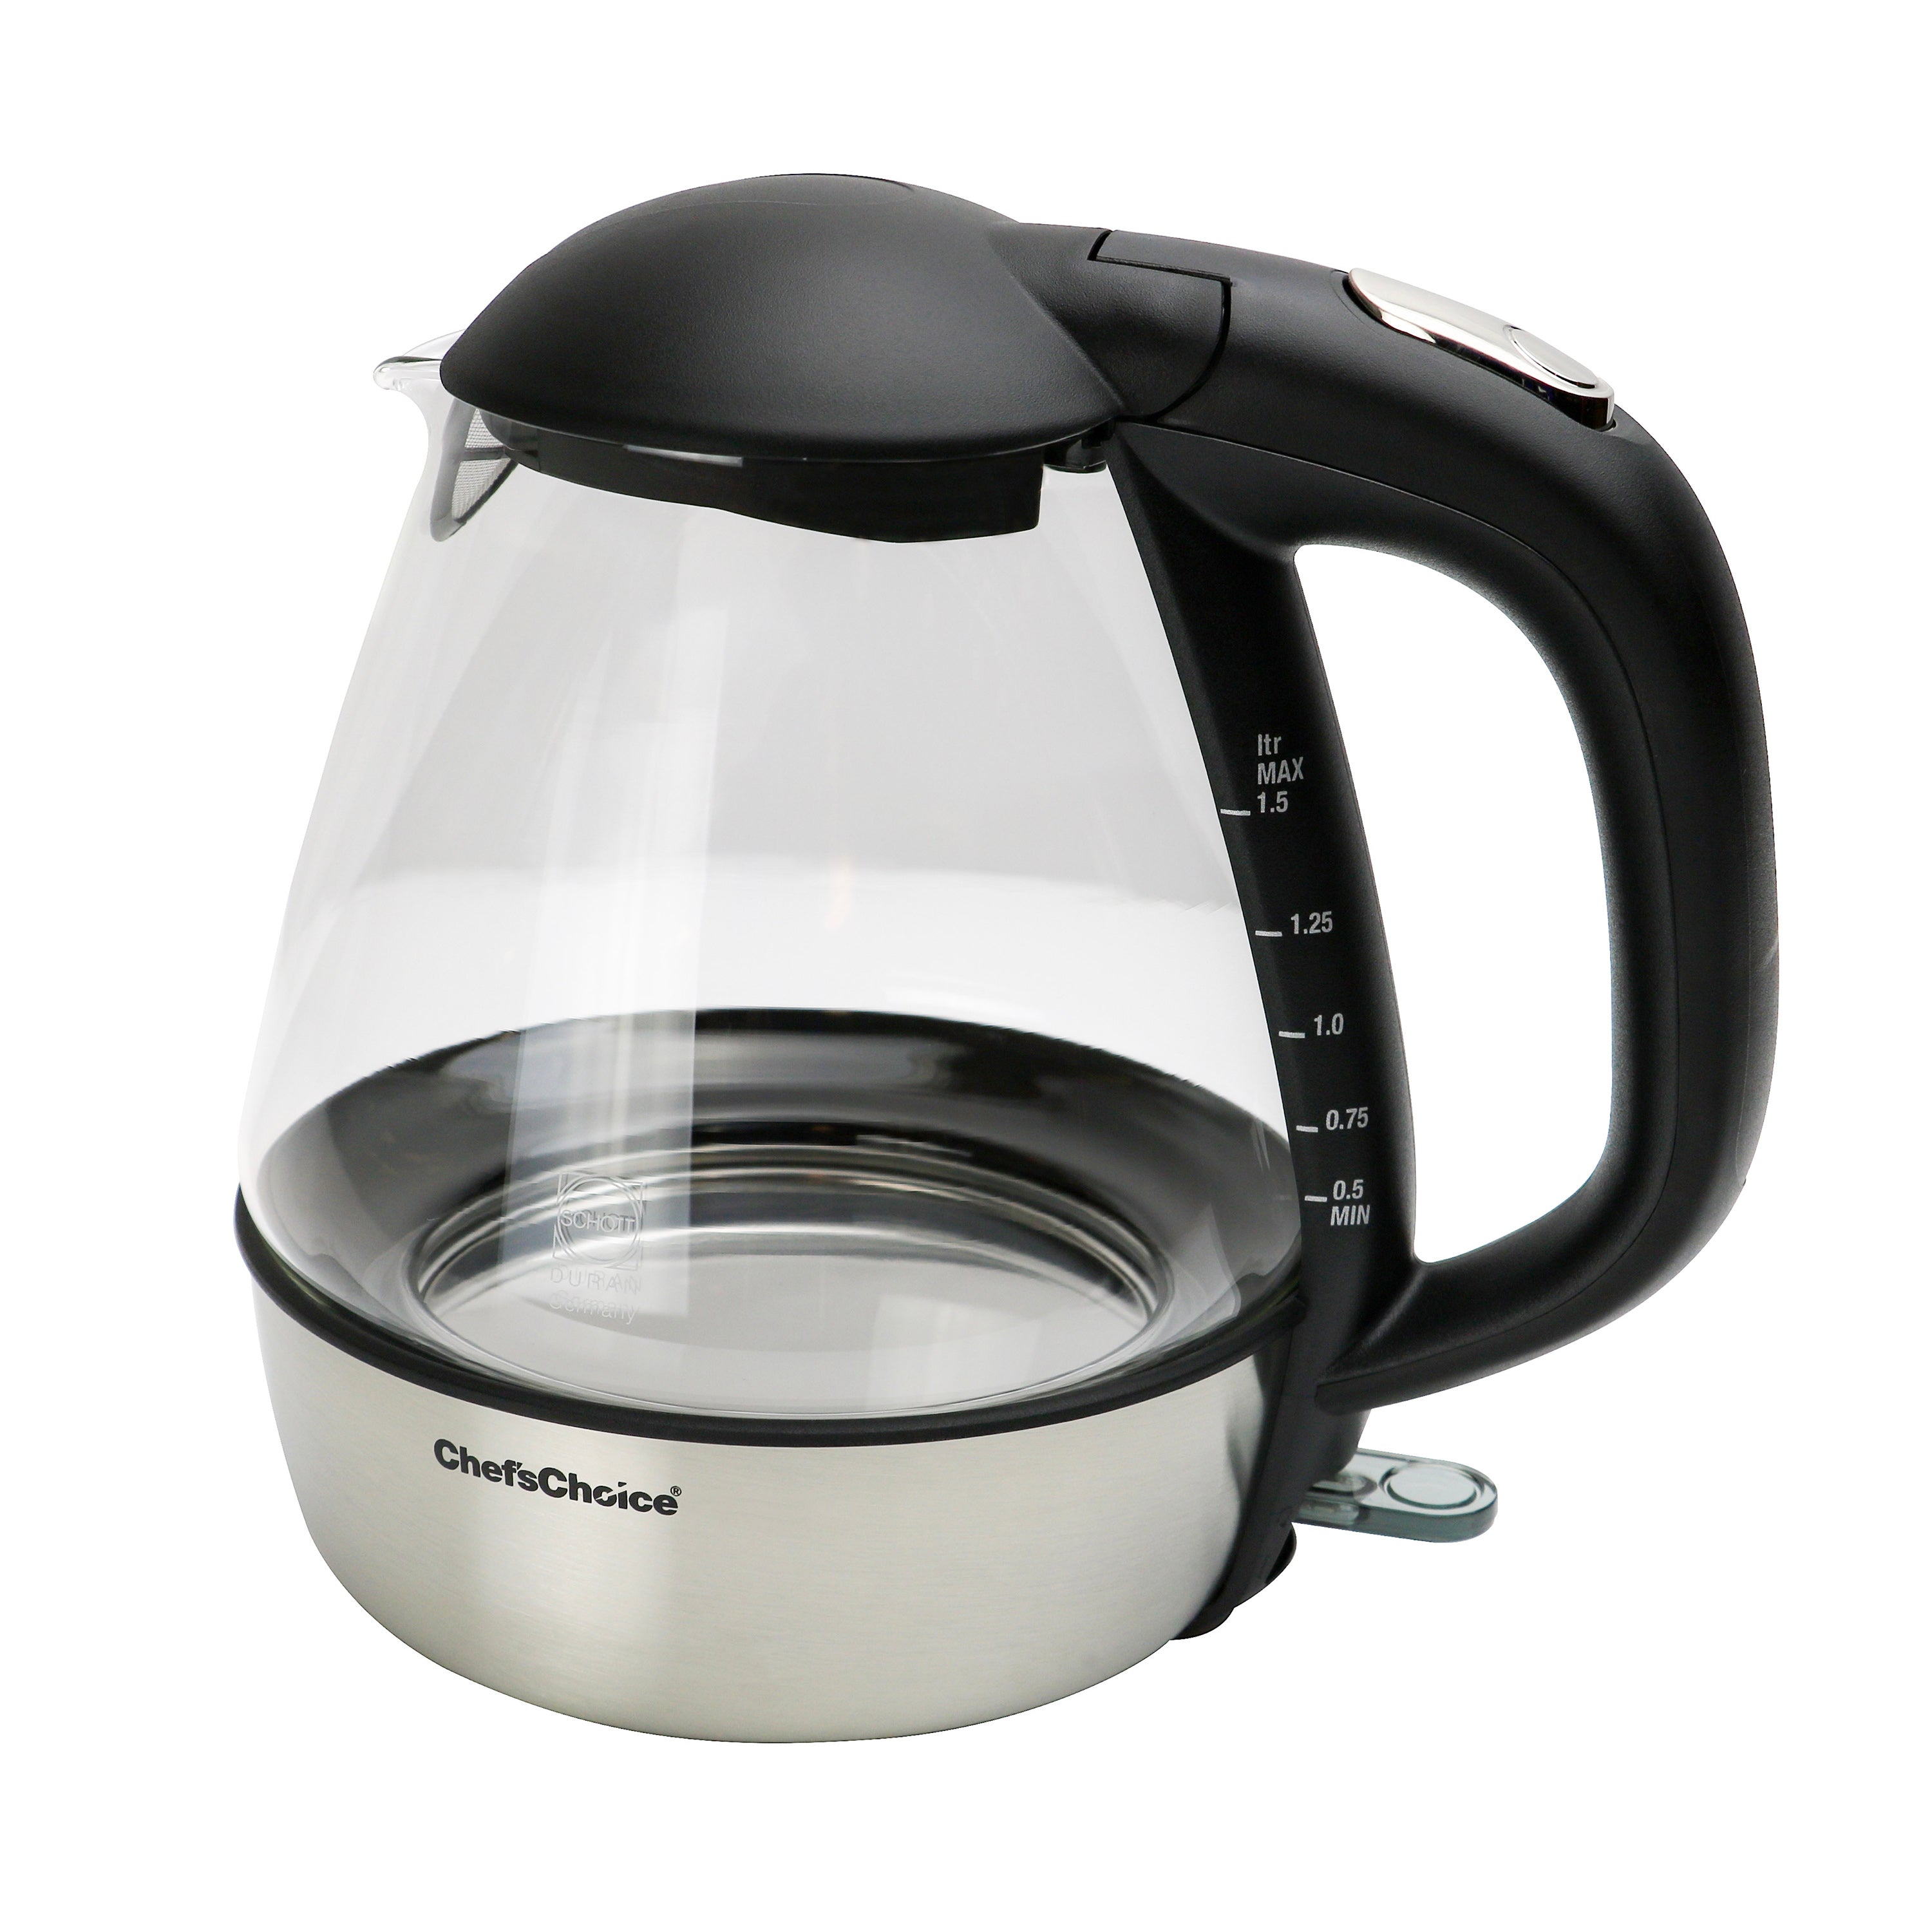 Glass Electric Kettle With Stainless Steel Filter And Inner Lid